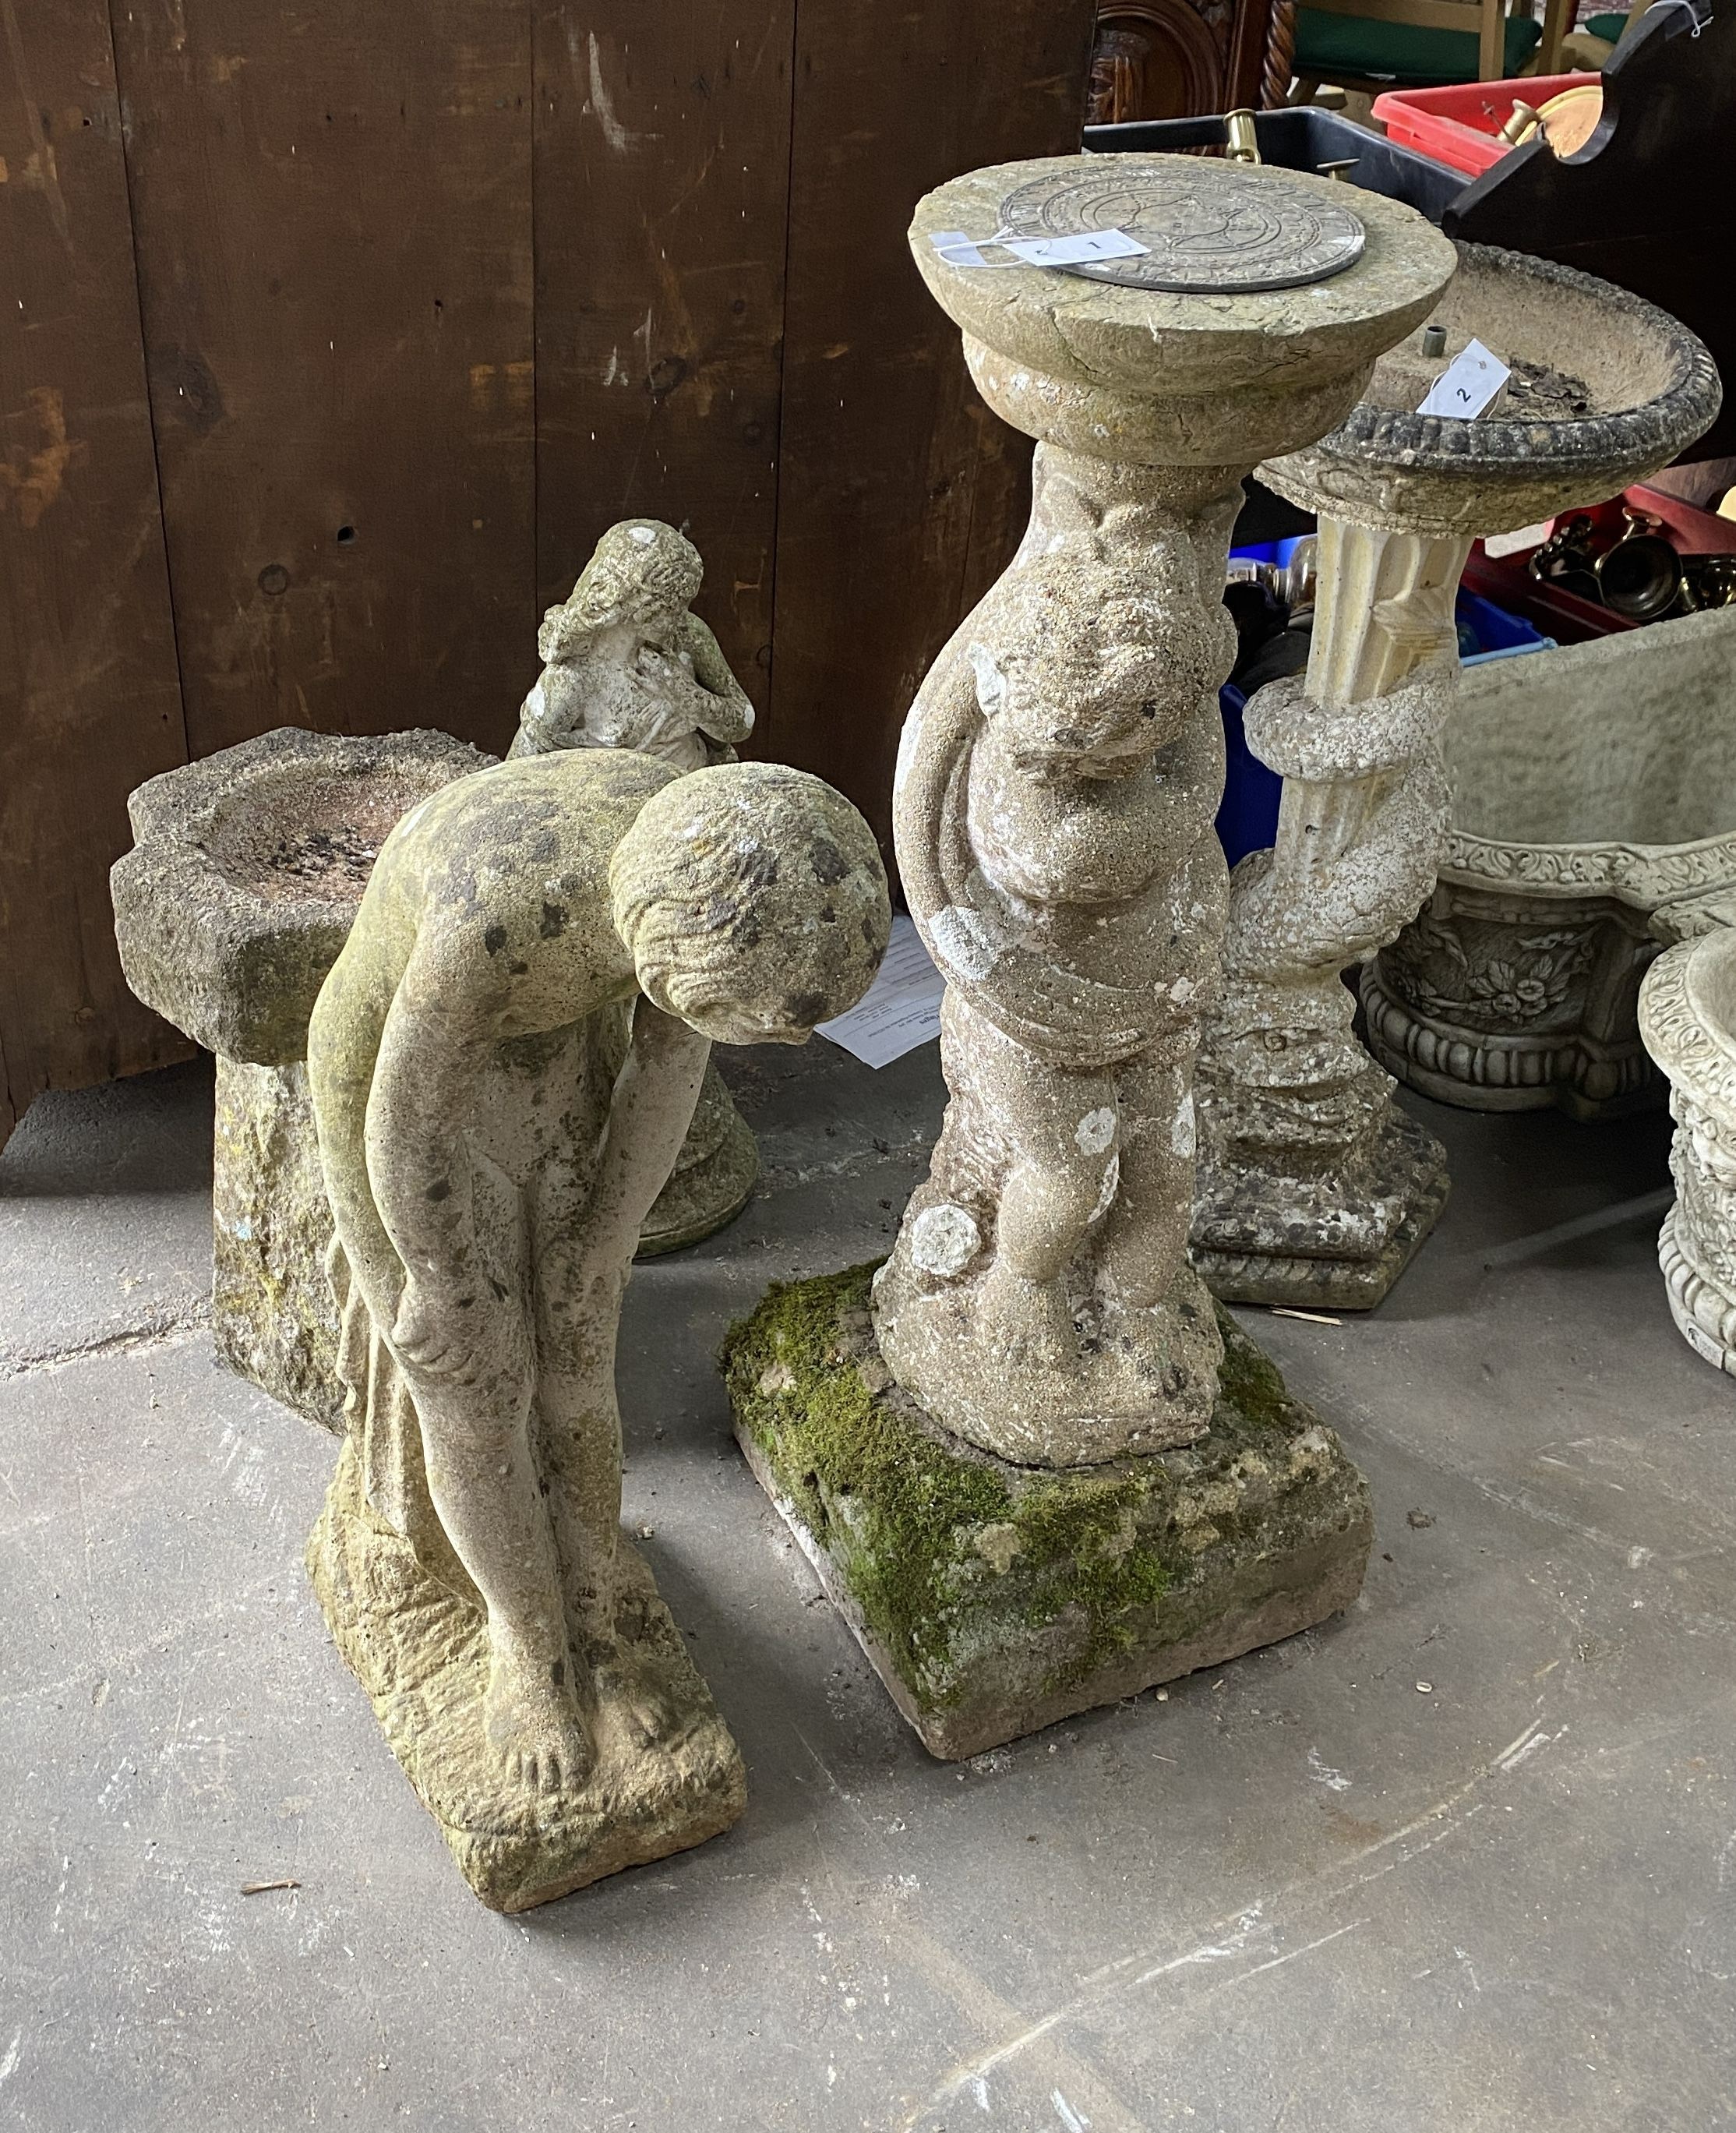 A reconstituted stone figural sundial, a female bather figure, bird bath and one other garden